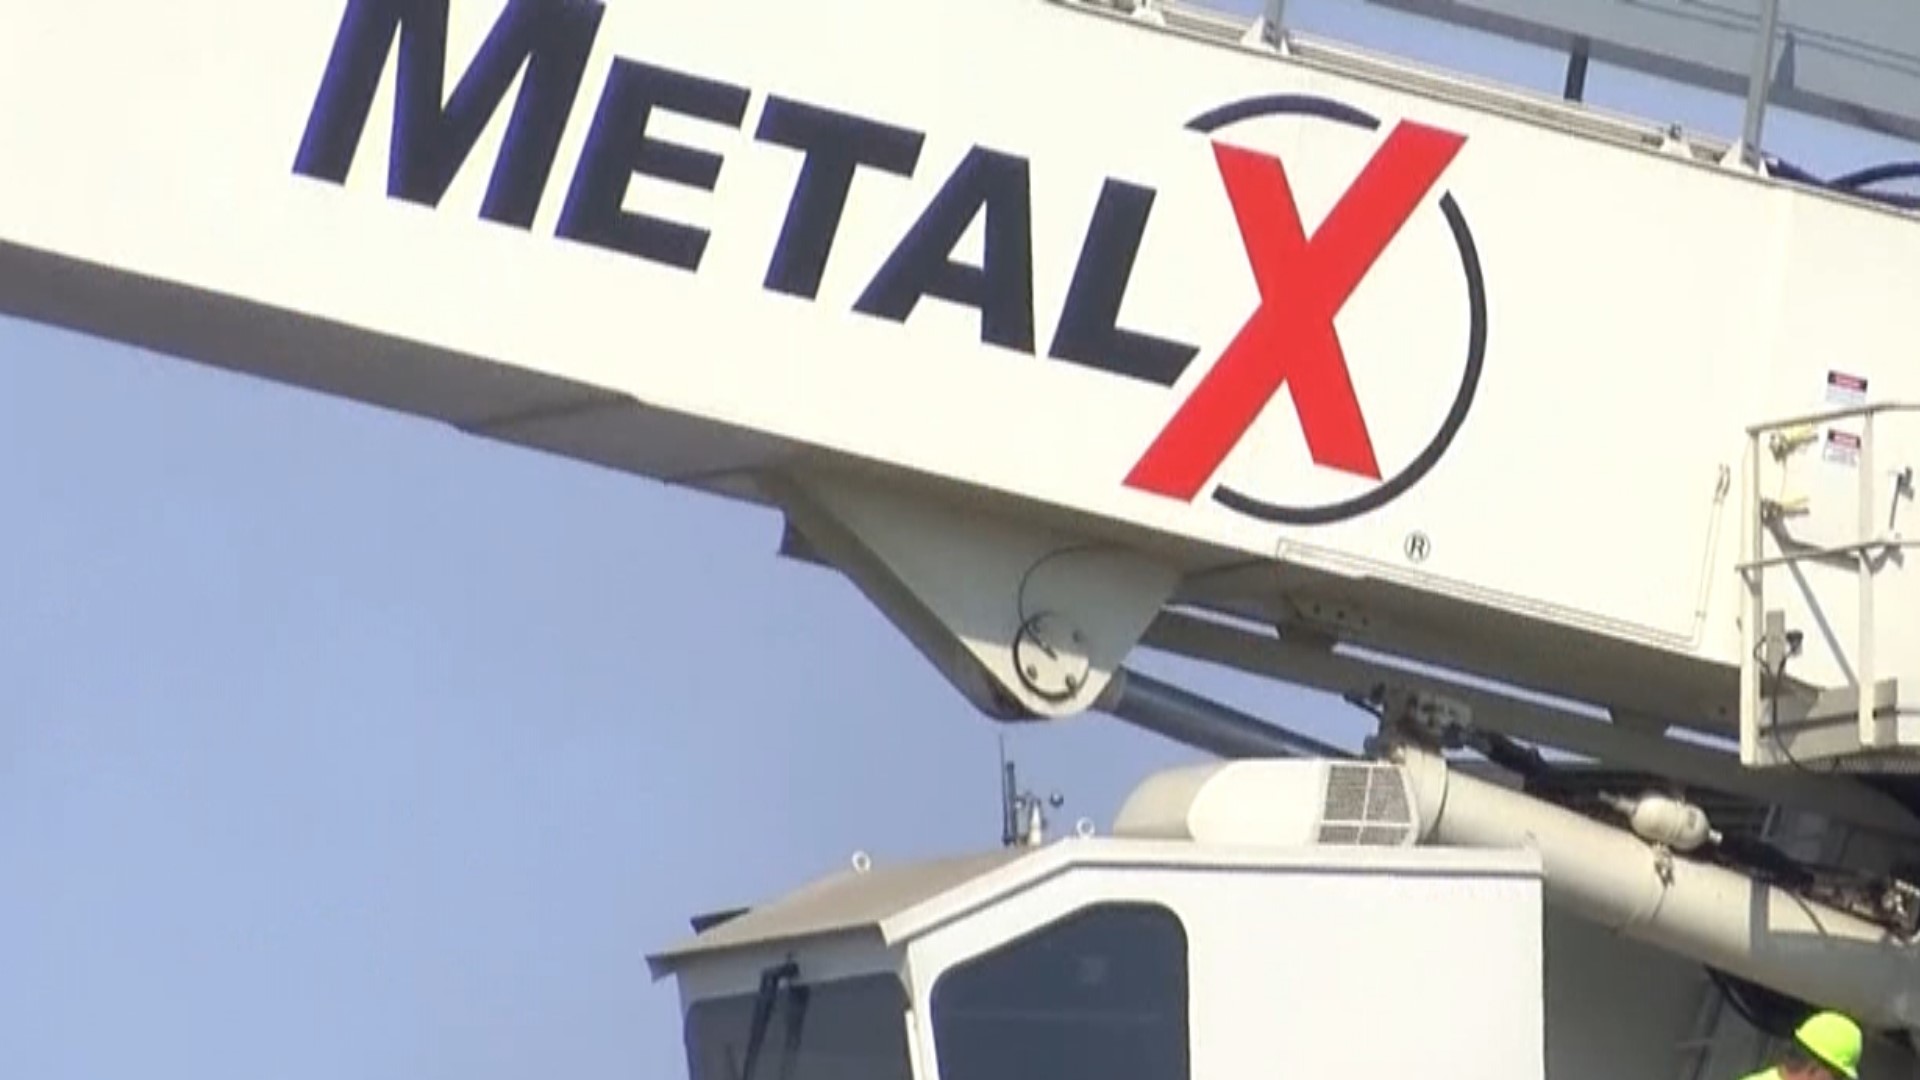 MMX Aluminum, a $253 million facility, is expected to create 180 jobs and generate $14.4 million in new annual payroll.